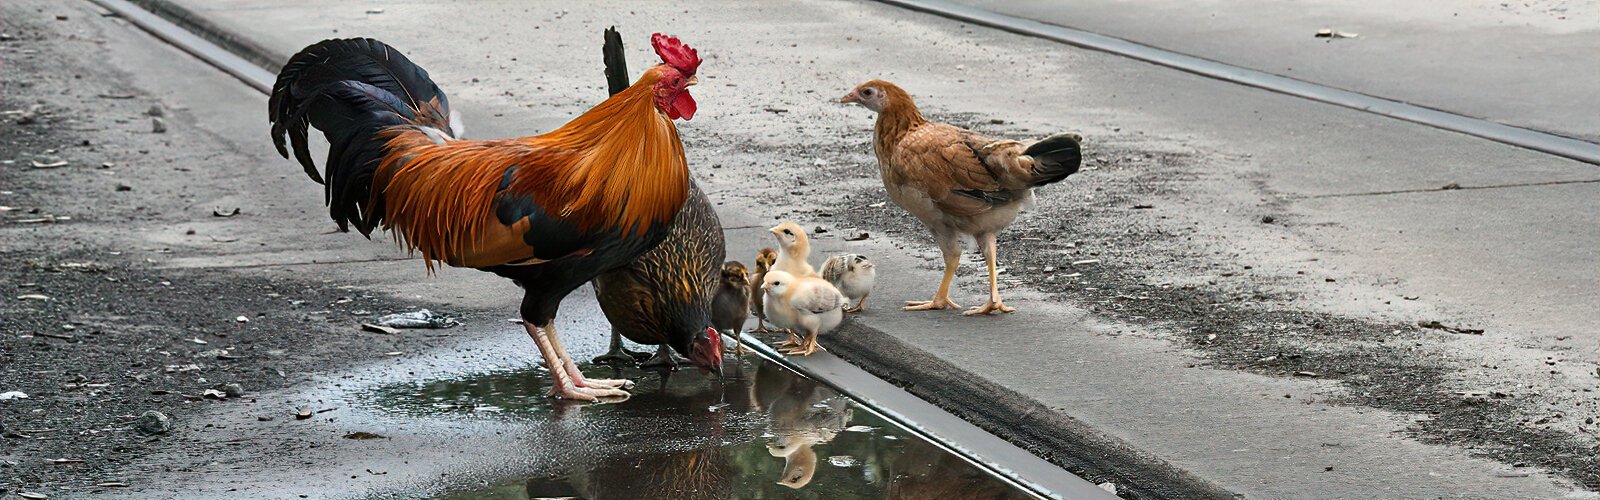 A family of chickens, alleged descendants of the first chickens brought by Cuban immigrants, drink from a rain puddle on the streetcar tracks. The chickens run wild by Centennial Park and are legally protected from being harassed, captured or killed.